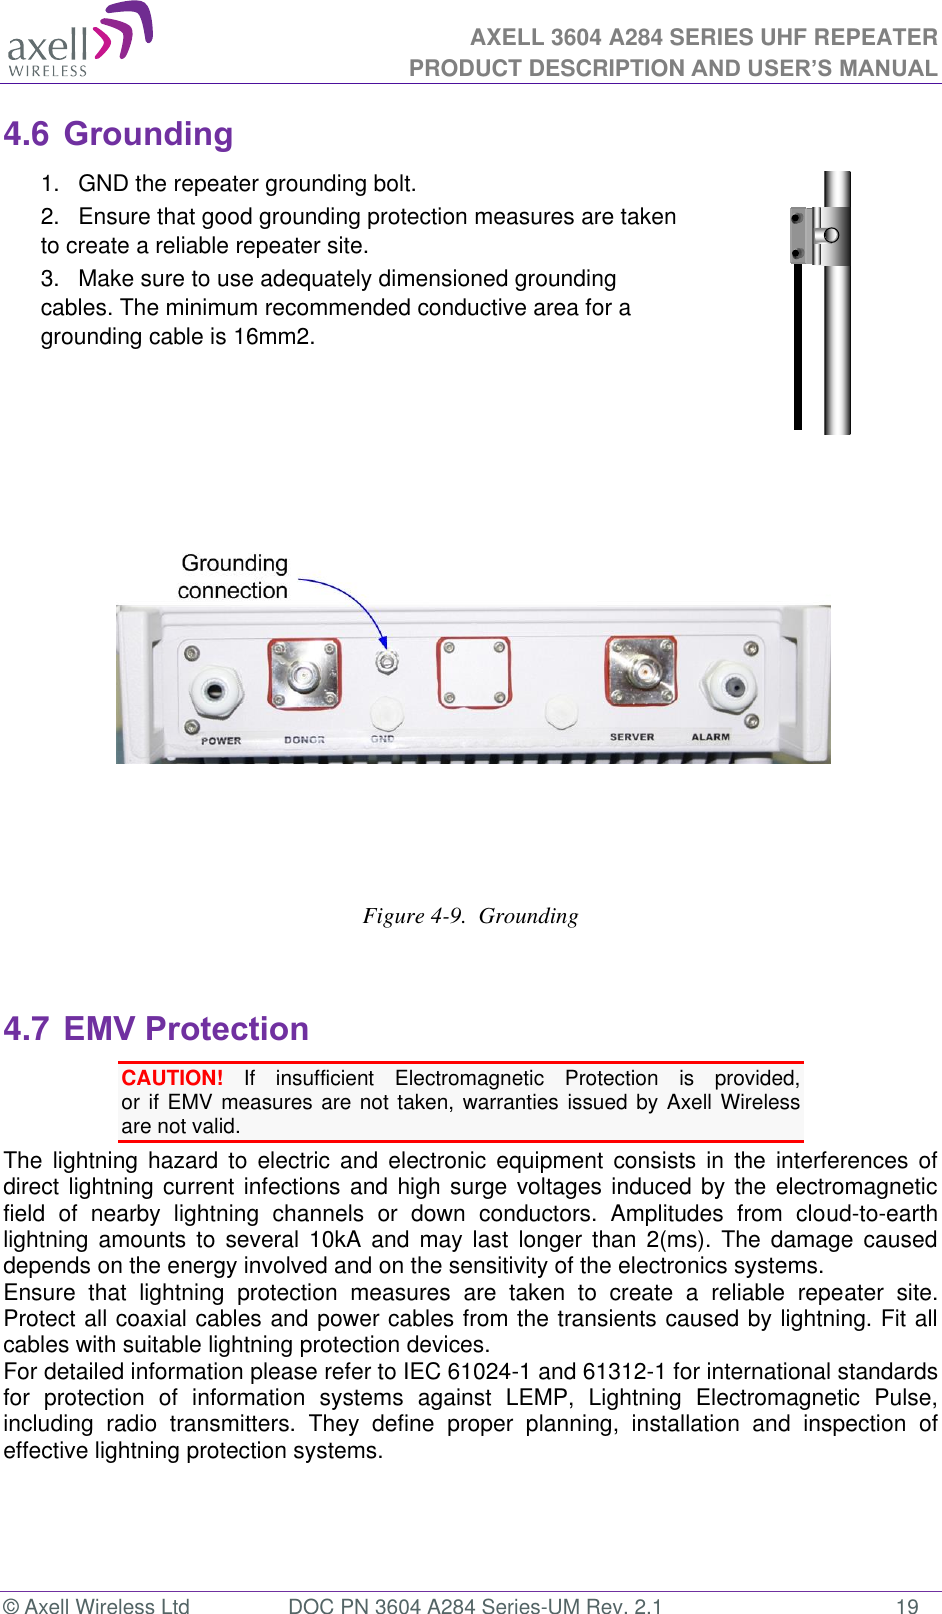 AXELL 3604 A284 SERIES UHF REPEATER PRODUCT DESCRIPTION AND USER’S MANUAL  © Axell Wireless Ltd  DOC PN 3604 A284 Series-UM Rev. 2.1  19 4.6 Grounding 1.  GND the repeater grounding bolt. 2.  Ensure that good grounding protection measures are taken to create a reliable repeater site.  3.  Make sure to use adequately dimensioned grounding cables. The minimum recommended conductive area for a grounding cable is 16mm2.           Figure 4-9.  Grounding  4.7 EMV Protection CAUTION!  If  insufficient  Electromagnetic  Protection  is  provided,  or if EMV measures are not taken, warranties issued by Axell Wireless are not valid. The  lightning  hazard  to  electric  and  electronic  equipment  consists  in  the  interferences  of direct lightning current infections and high surge voltages induced by the electromagnetic field  of  nearby  lightning  channels  or  down  conductors.  Amplitudes  from  cloud-to-earth lightning  amounts  to  several  10kA  and  may  last  longer  than  2(ms).  The  damage  caused depends on the energy involved and on the sensitivity of the electronics systems.  Ensure  that  lightning  protection  measures  are  taken  to  create  a  reliable  repeater  site. Protect all coaxial cables and power cables from the transients caused by lightning. Fit all cables with suitable lightning protection devices.  For detailed information please refer to IEC 61024-1 and 61312-1 for international standards for  protection  of  information  systems  against  LEMP,  Lightning  Electromagnetic  Pulse, including  radio  transmitters.  They  define  proper  planning,  installation  and  inspection  of effective lightning protection systems.   